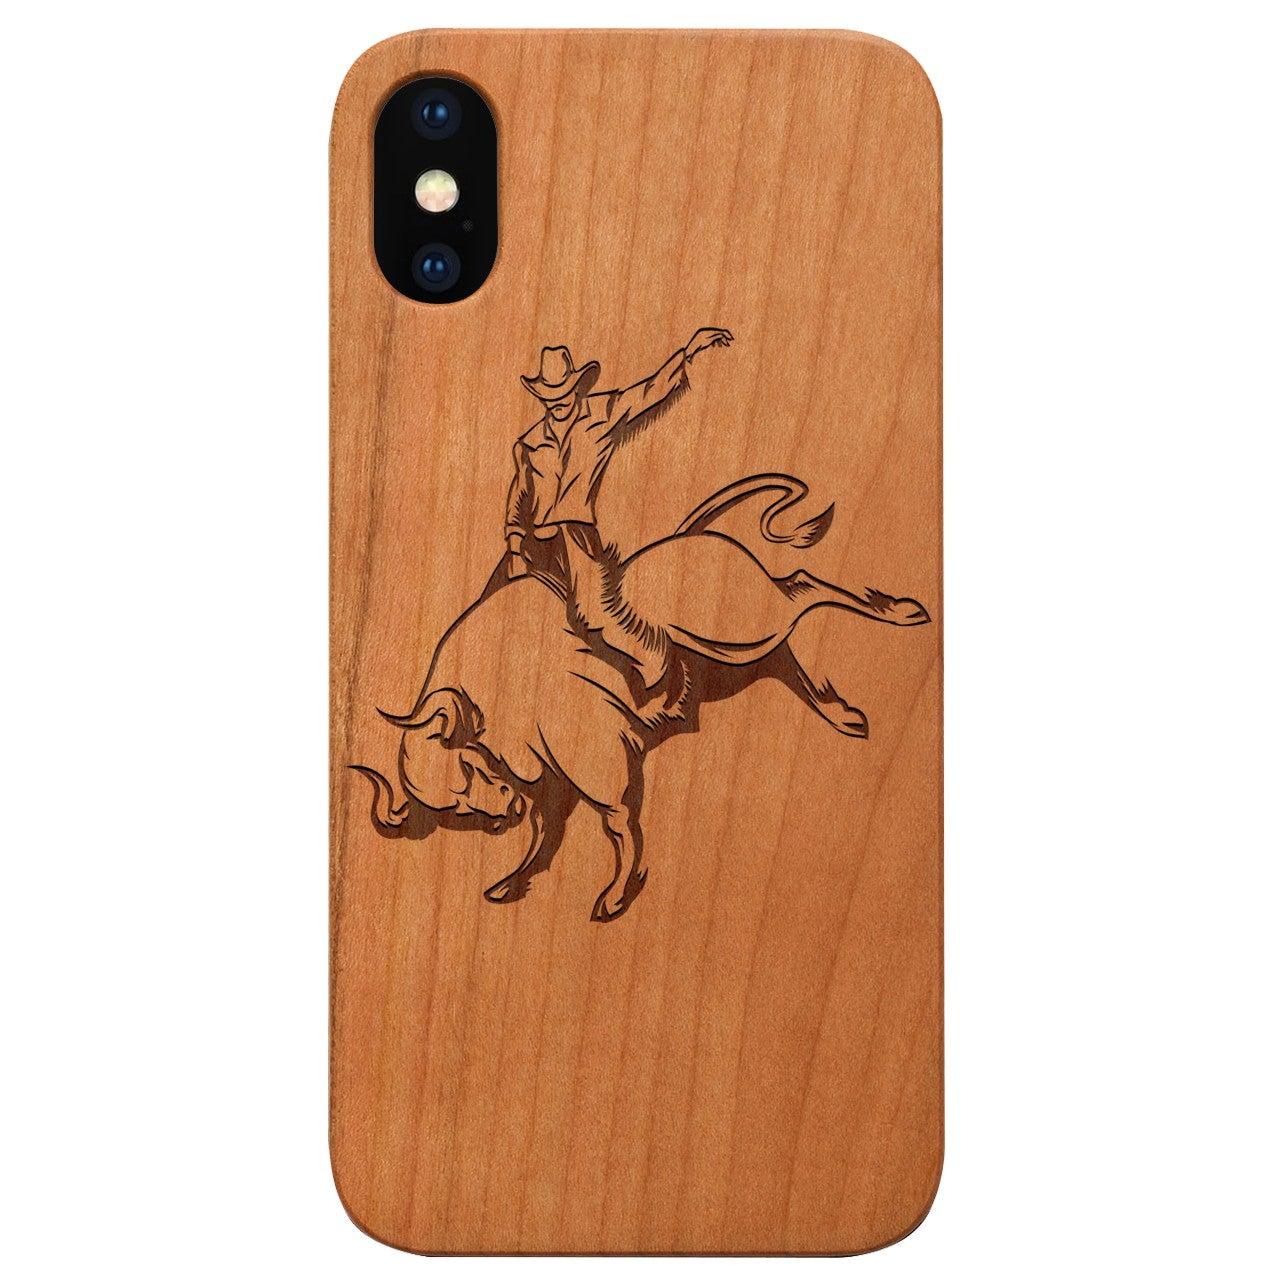  Bull Rider - Engraved - Wooden Phone Case - IPhone 13 Models